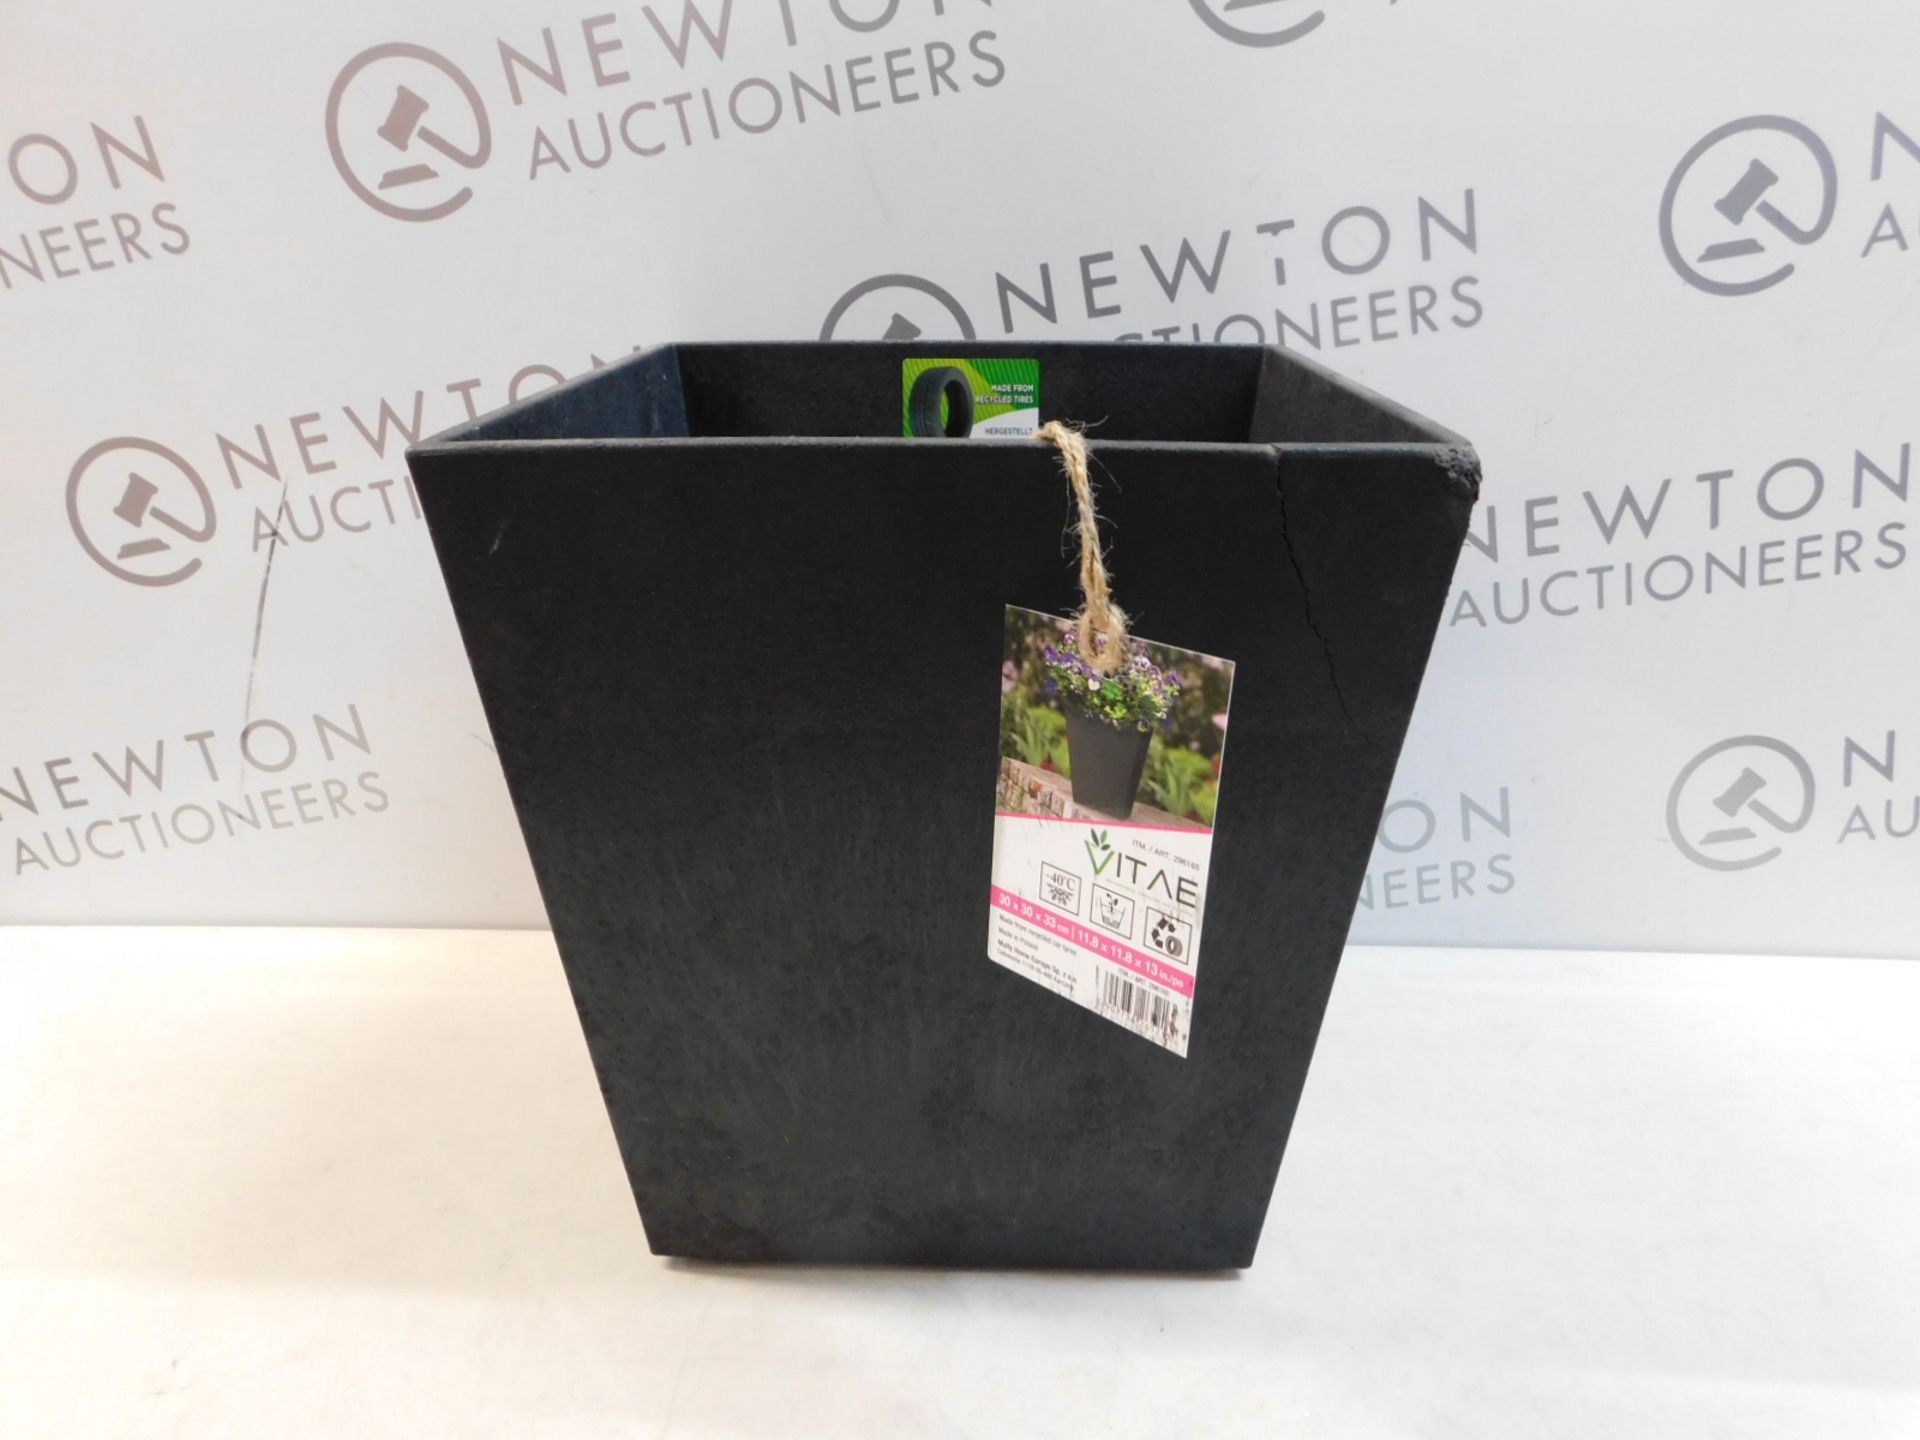 1 VITAE SONATA SLATE EFFECT PLANTER MADE FROM RECYCLED MATERIAL RRP Â£19.99 (MAY HAVE CRACKS)